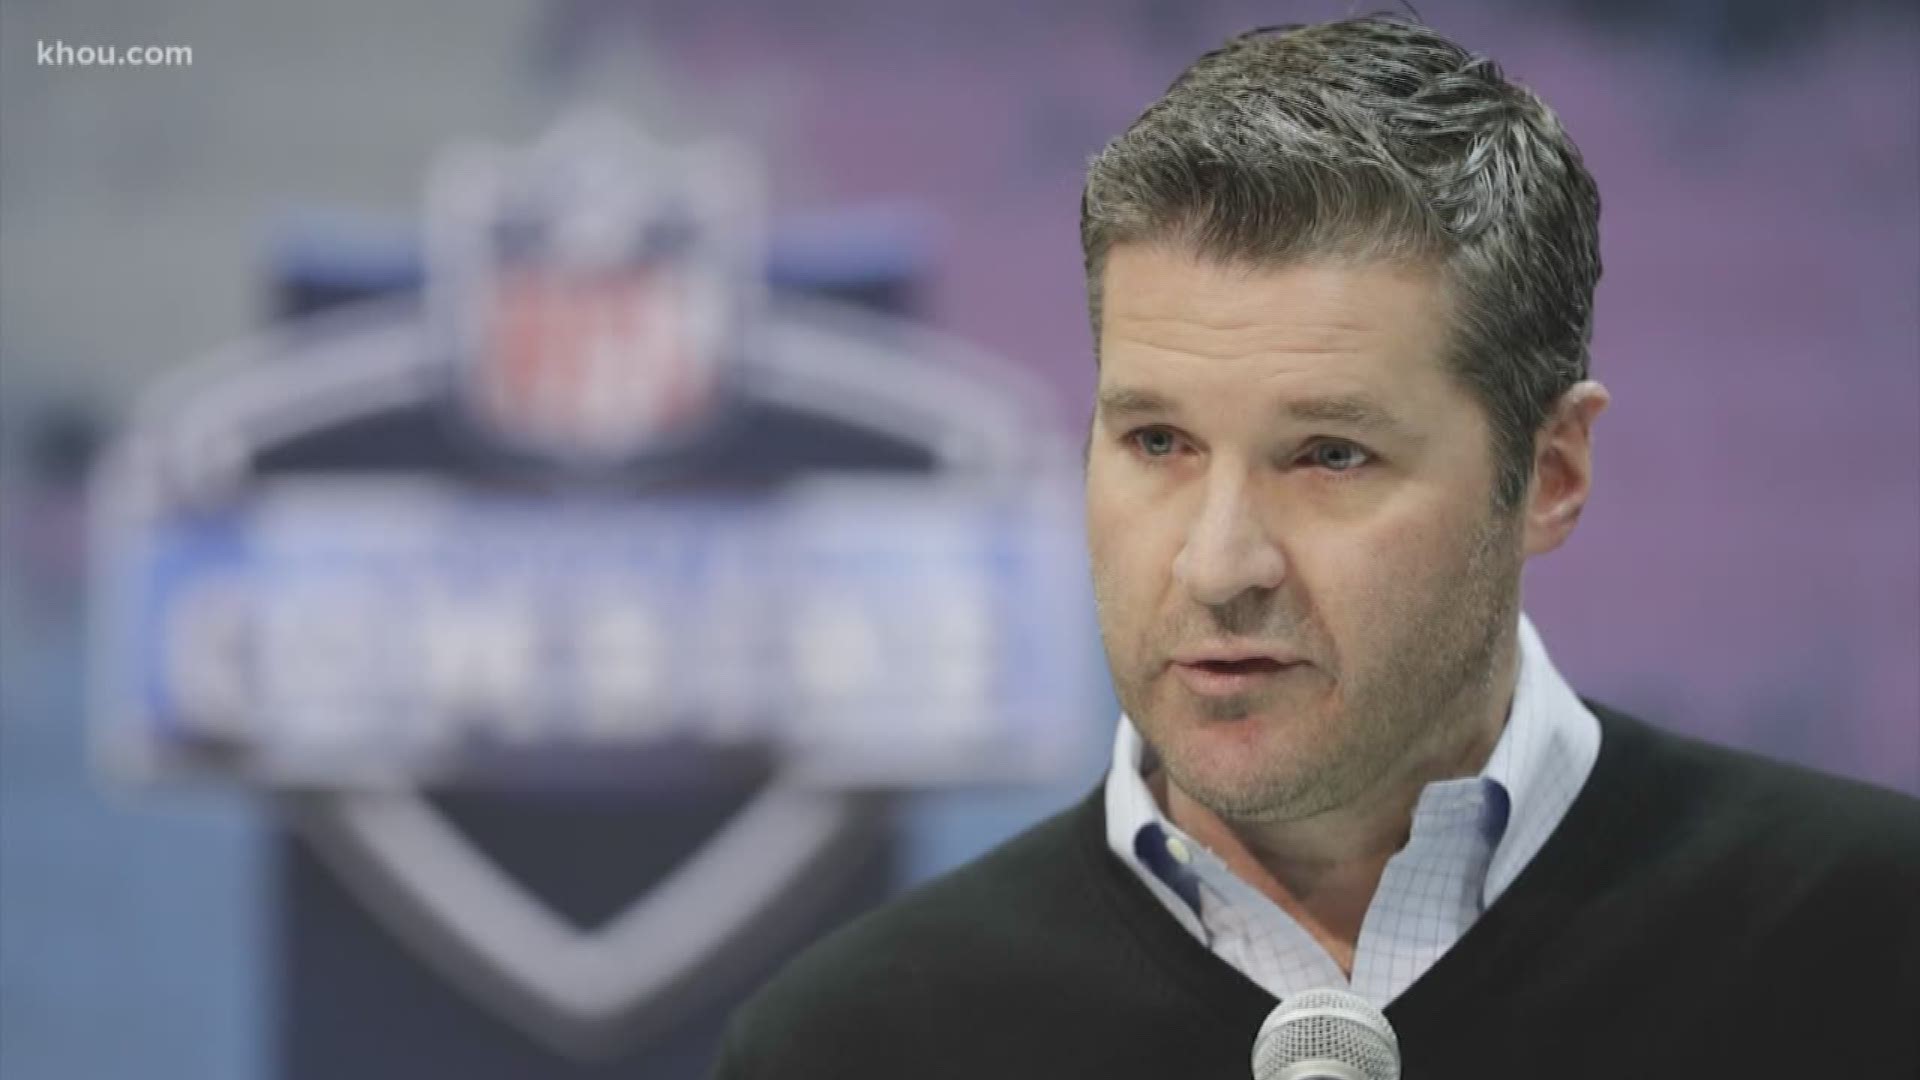 Houston Texans general manager Brian Gaine has been relieved of his duties as general manager, the team said in a statement Friday. Football operations will be led by Chris Olsen, the team's senior vice president of football administration, until the Texans find a replacement for Gaine.